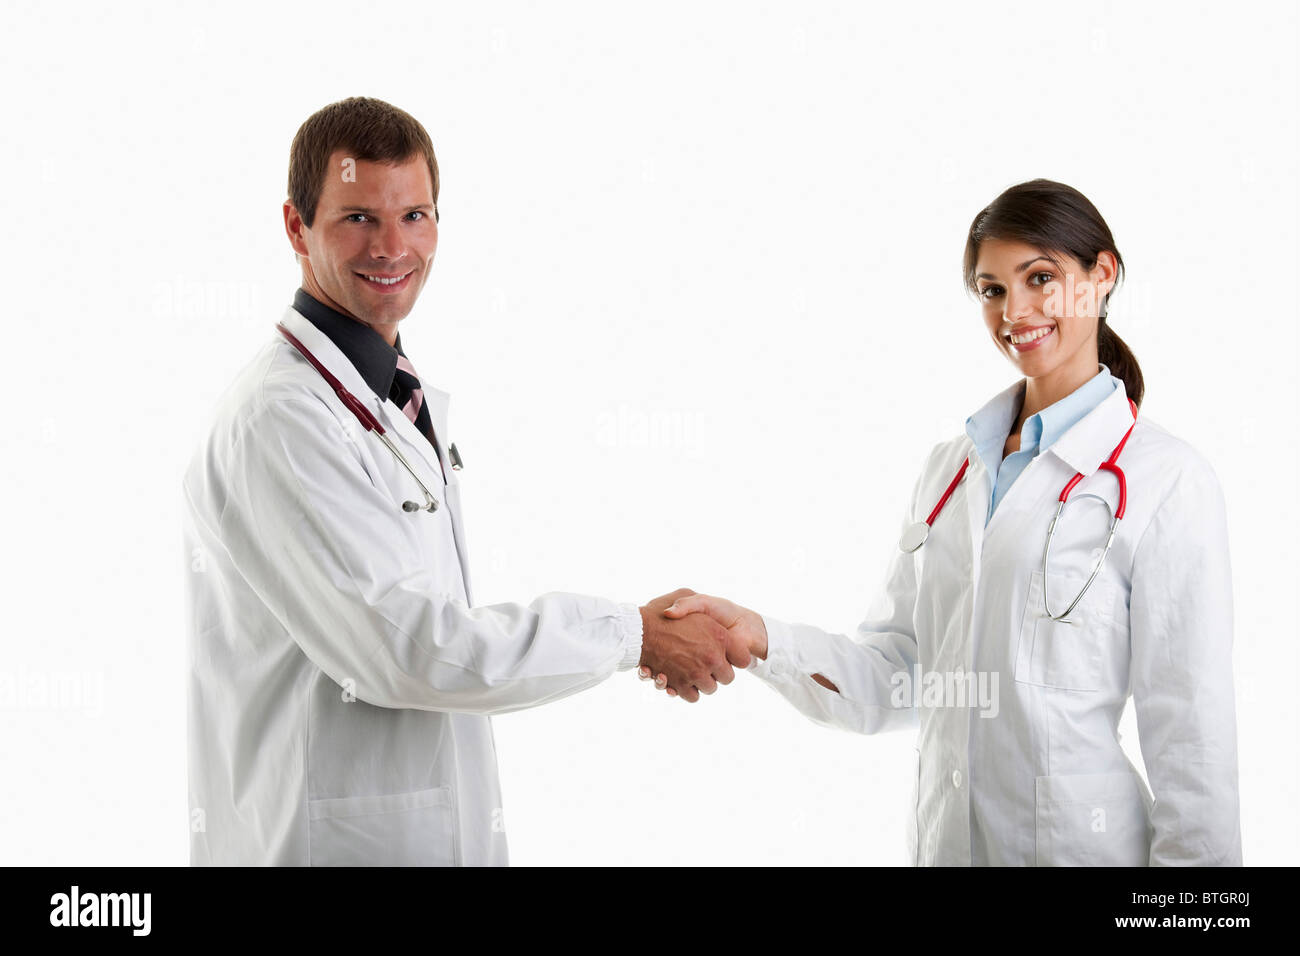 Two doctors shaking hands Stock Photo